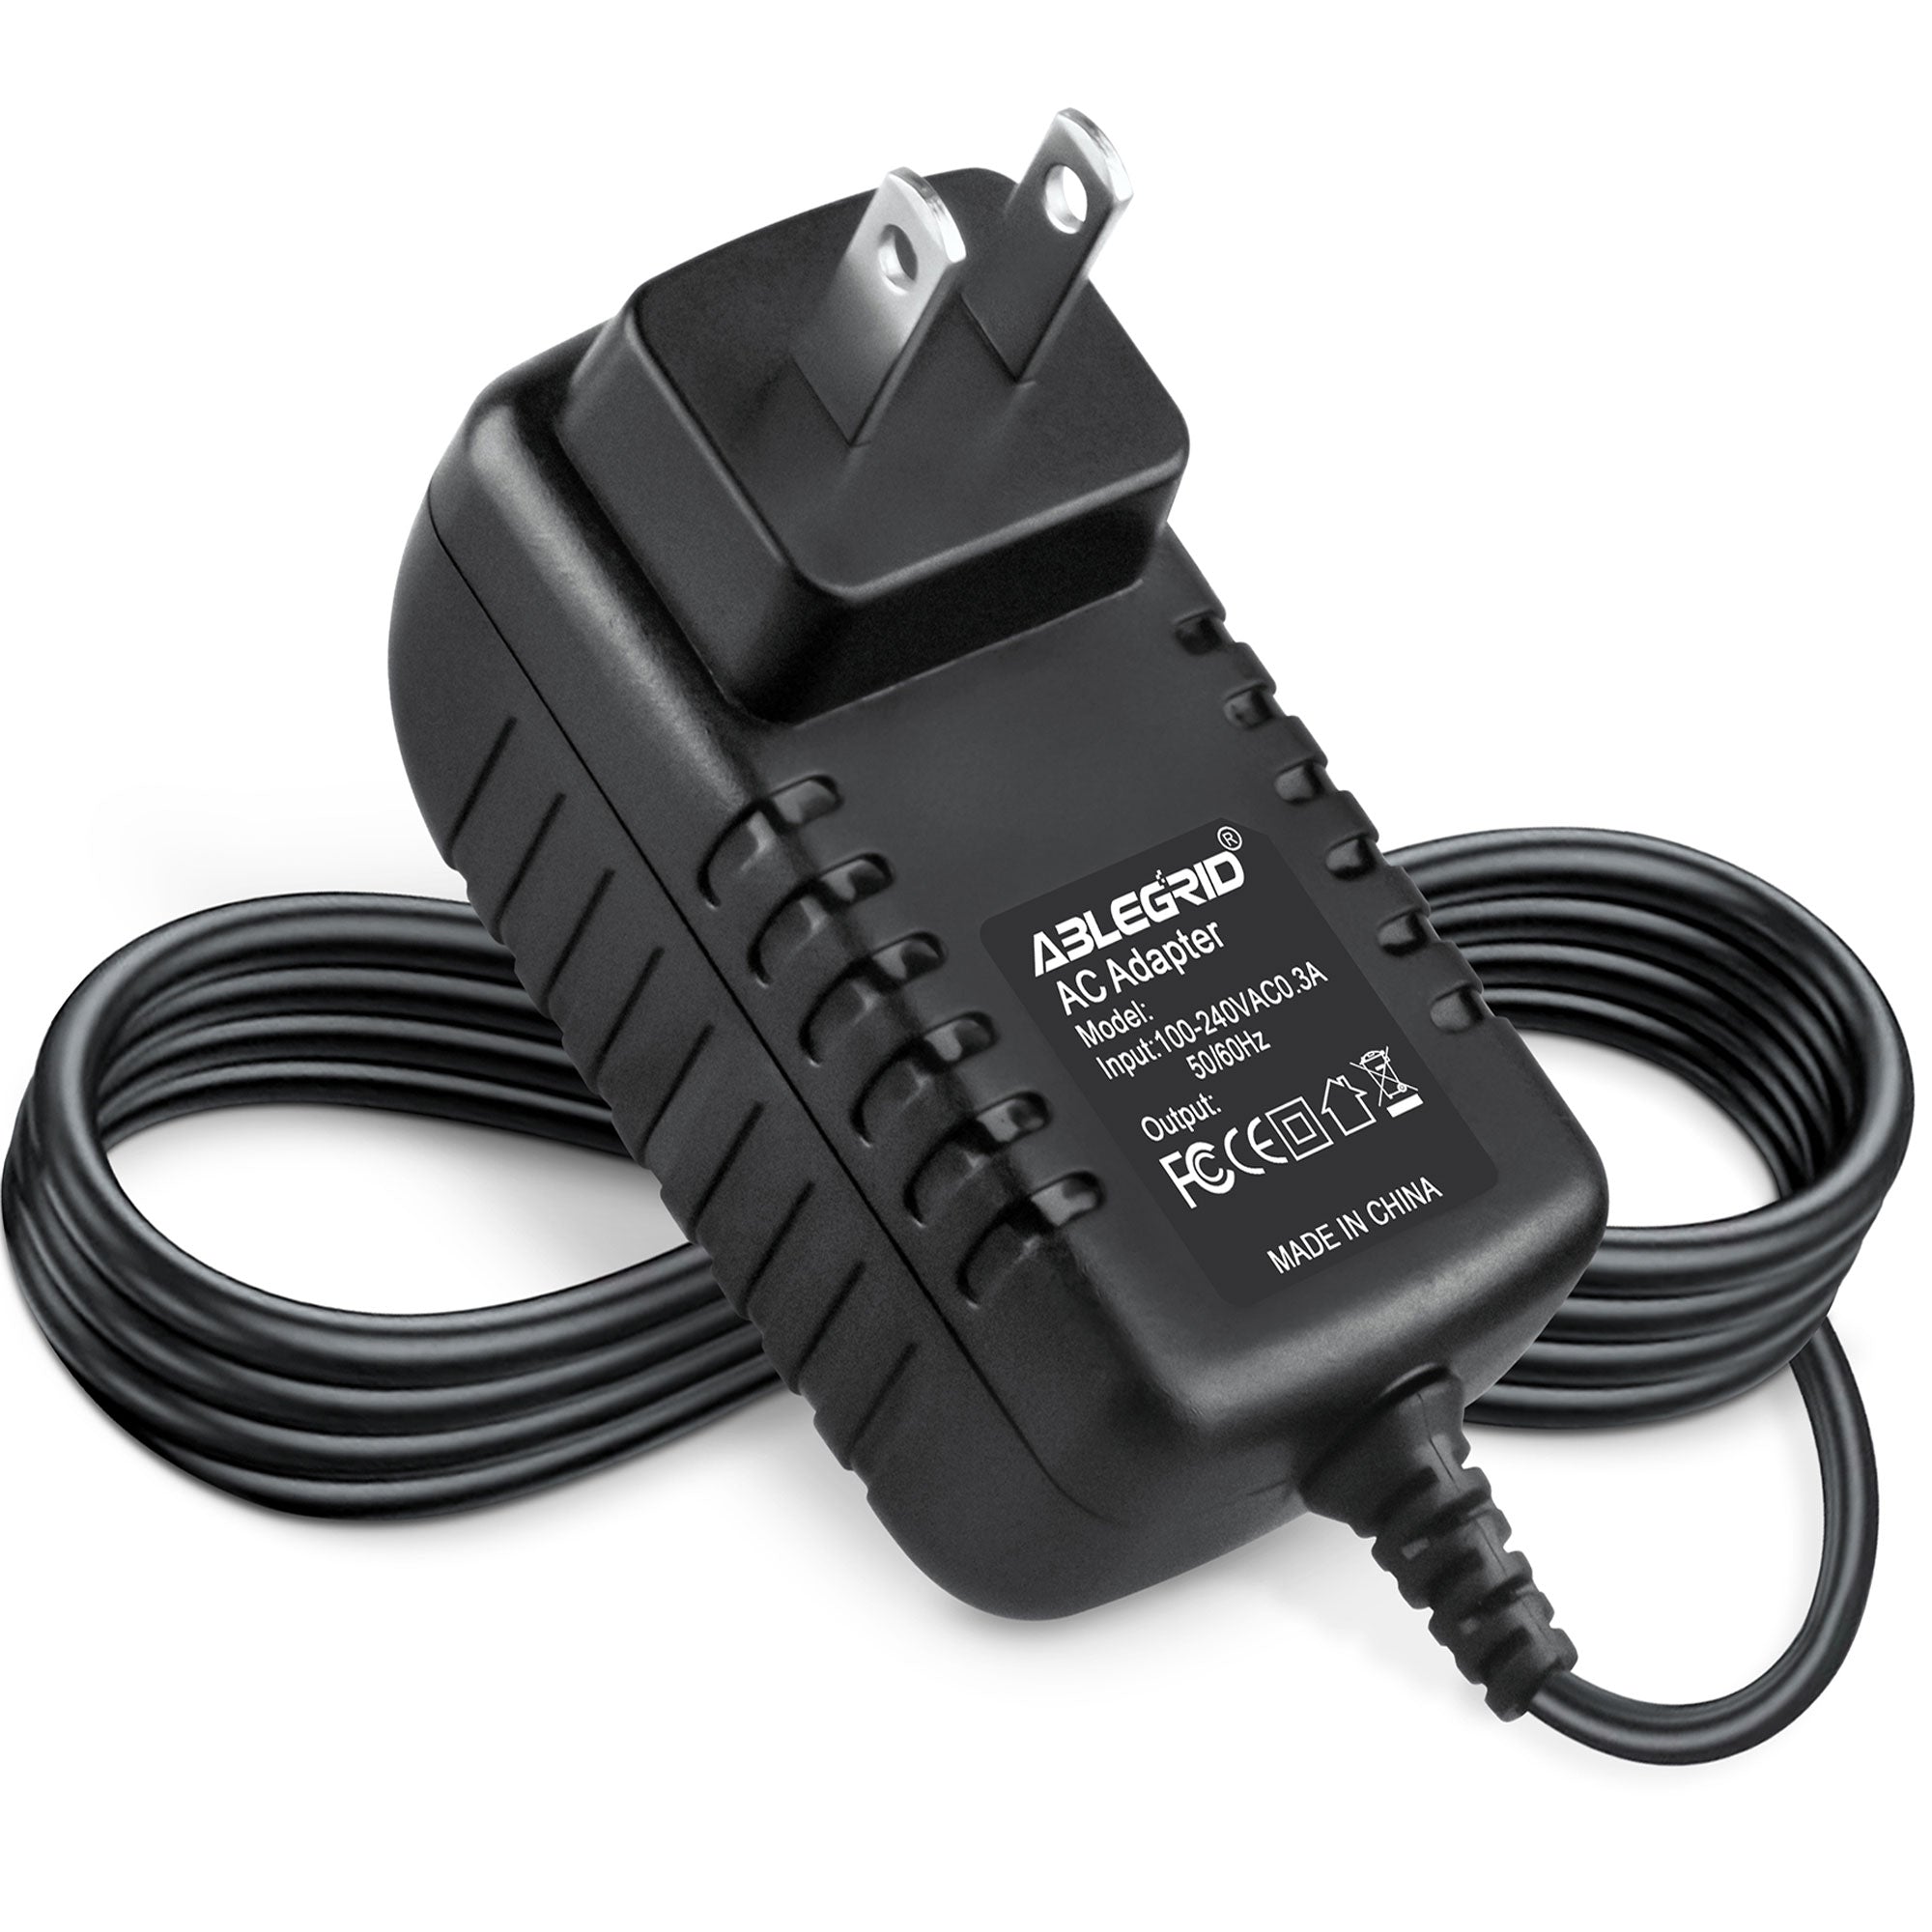 AbleGrid AC-DC Adapter for JobSite XF00066A HK-AH15-A12 Job Site HKAH15A12 Power Supply Cord Cable PS Wall Home Charger Input: 100 - 240 VAC 50/60Hz Worldwide Voltage Use Mains PSU